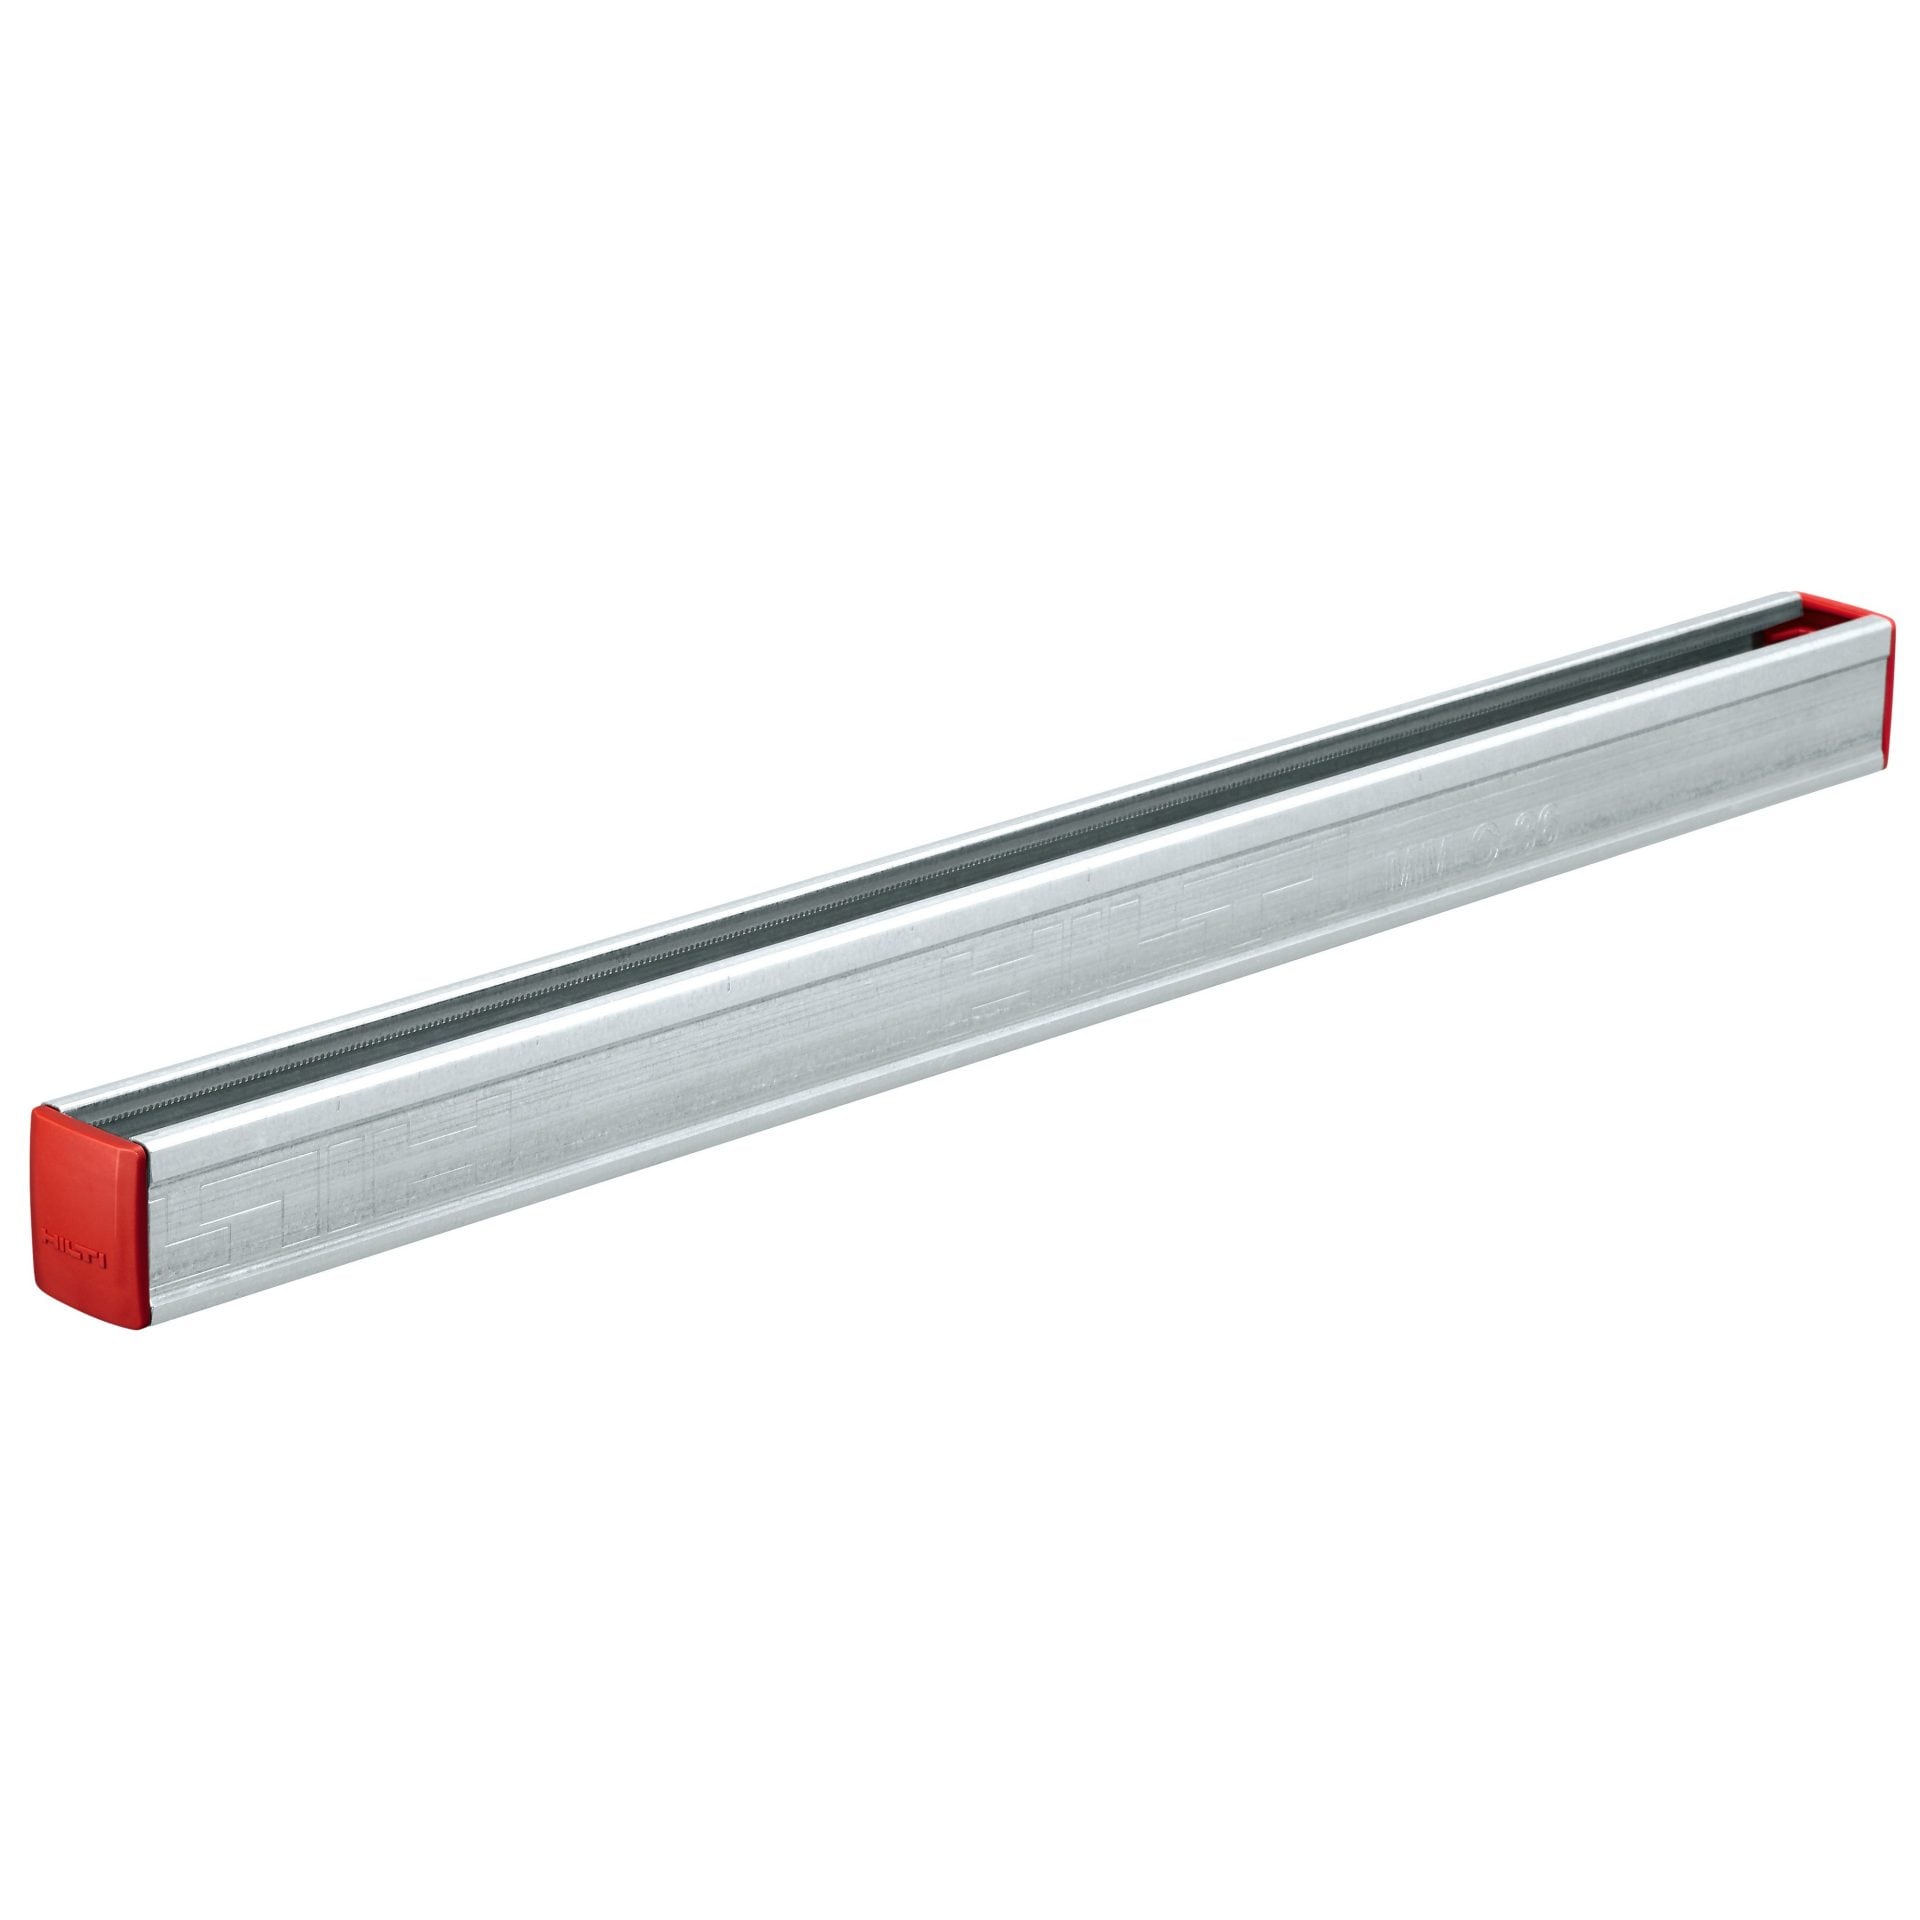 MM strut channel with low and weight CO2 for LEED certified sustainable construction